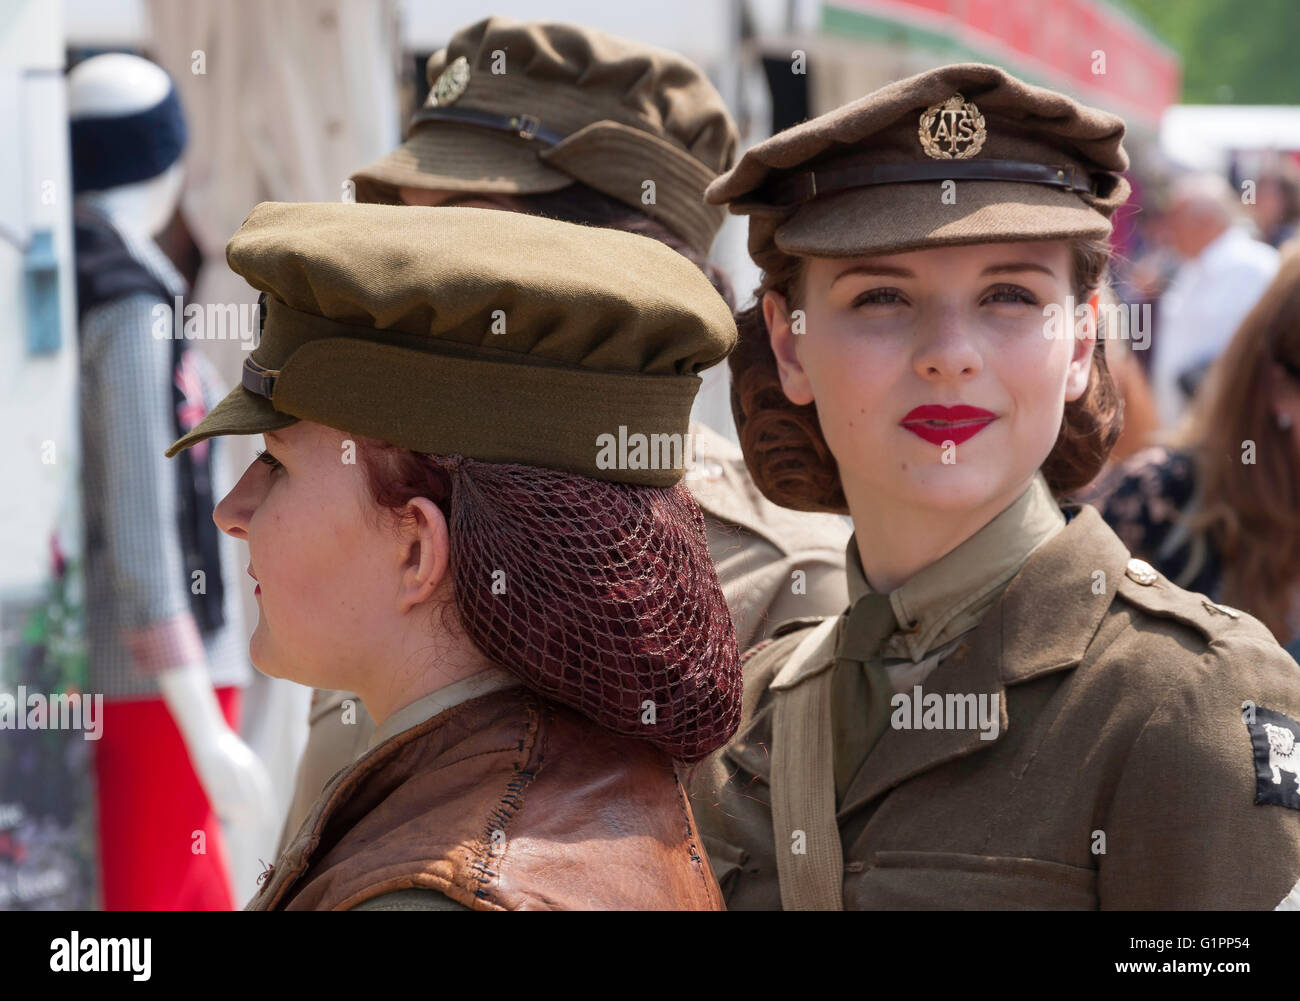 Auxiliary Territorial Service tribute women at Royal Windsor Horse Show, Home Park, Windsor, Berkshire, England, United Kingdom Stock Photo